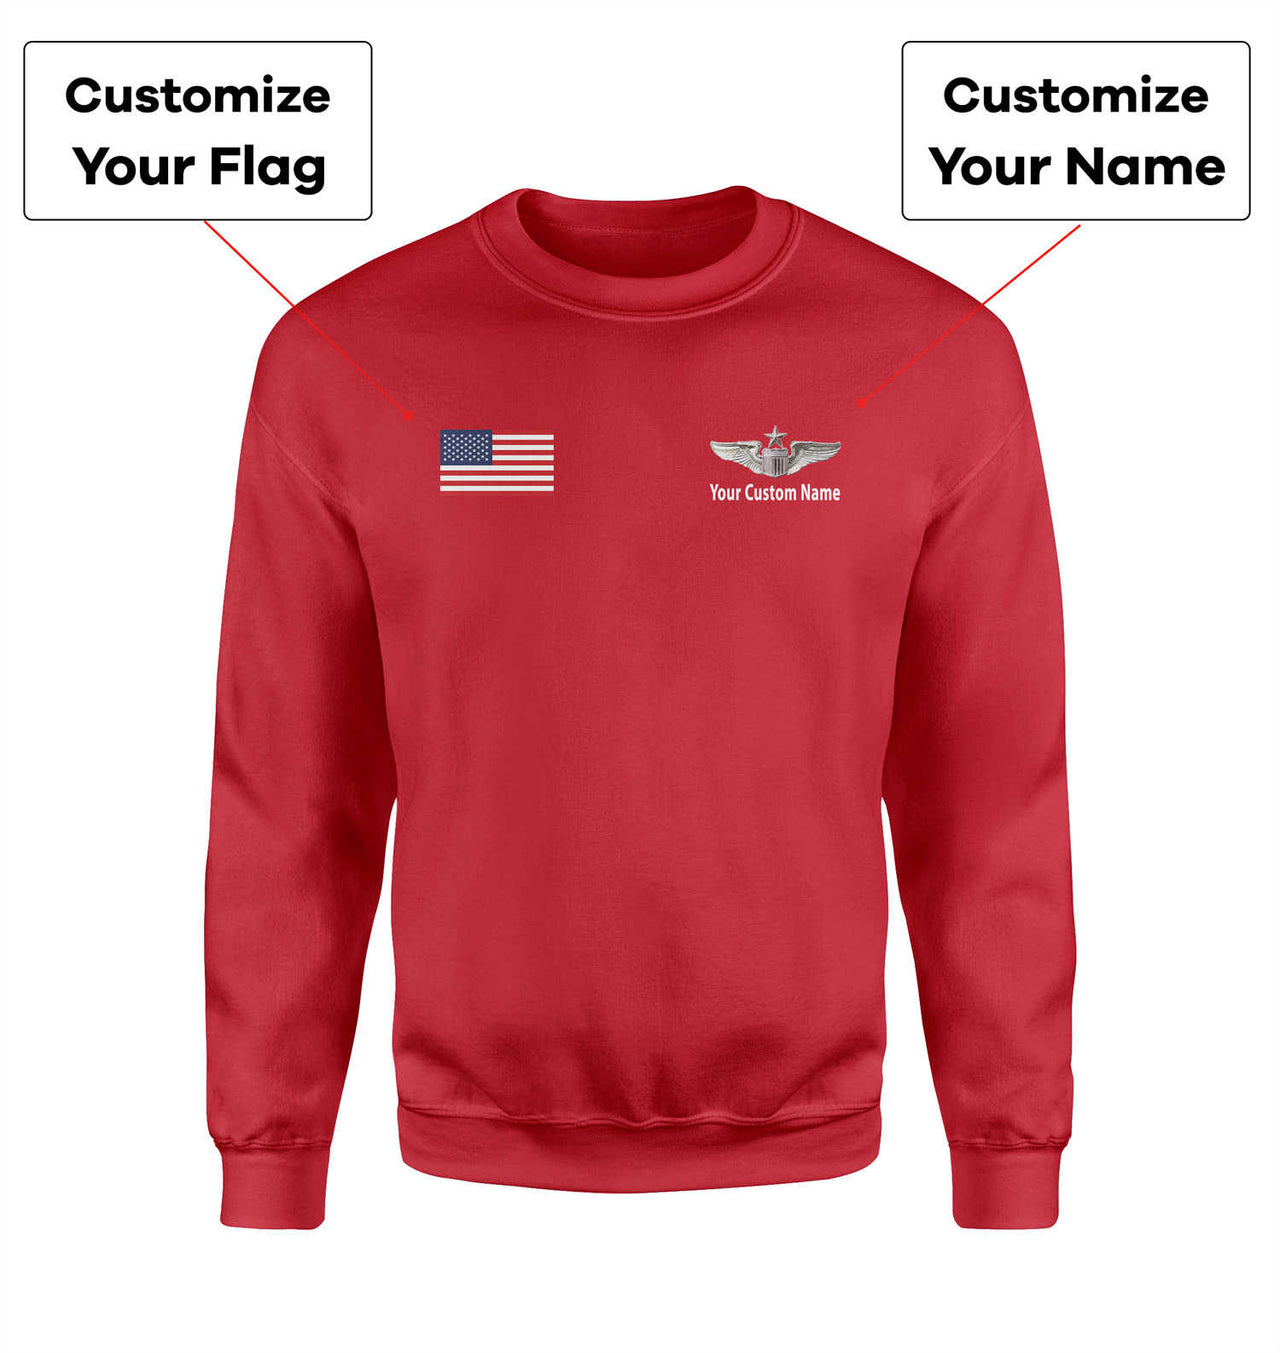 Custom Flag & Name with (US Air Force & Star) Designed 3D Sweatshirts